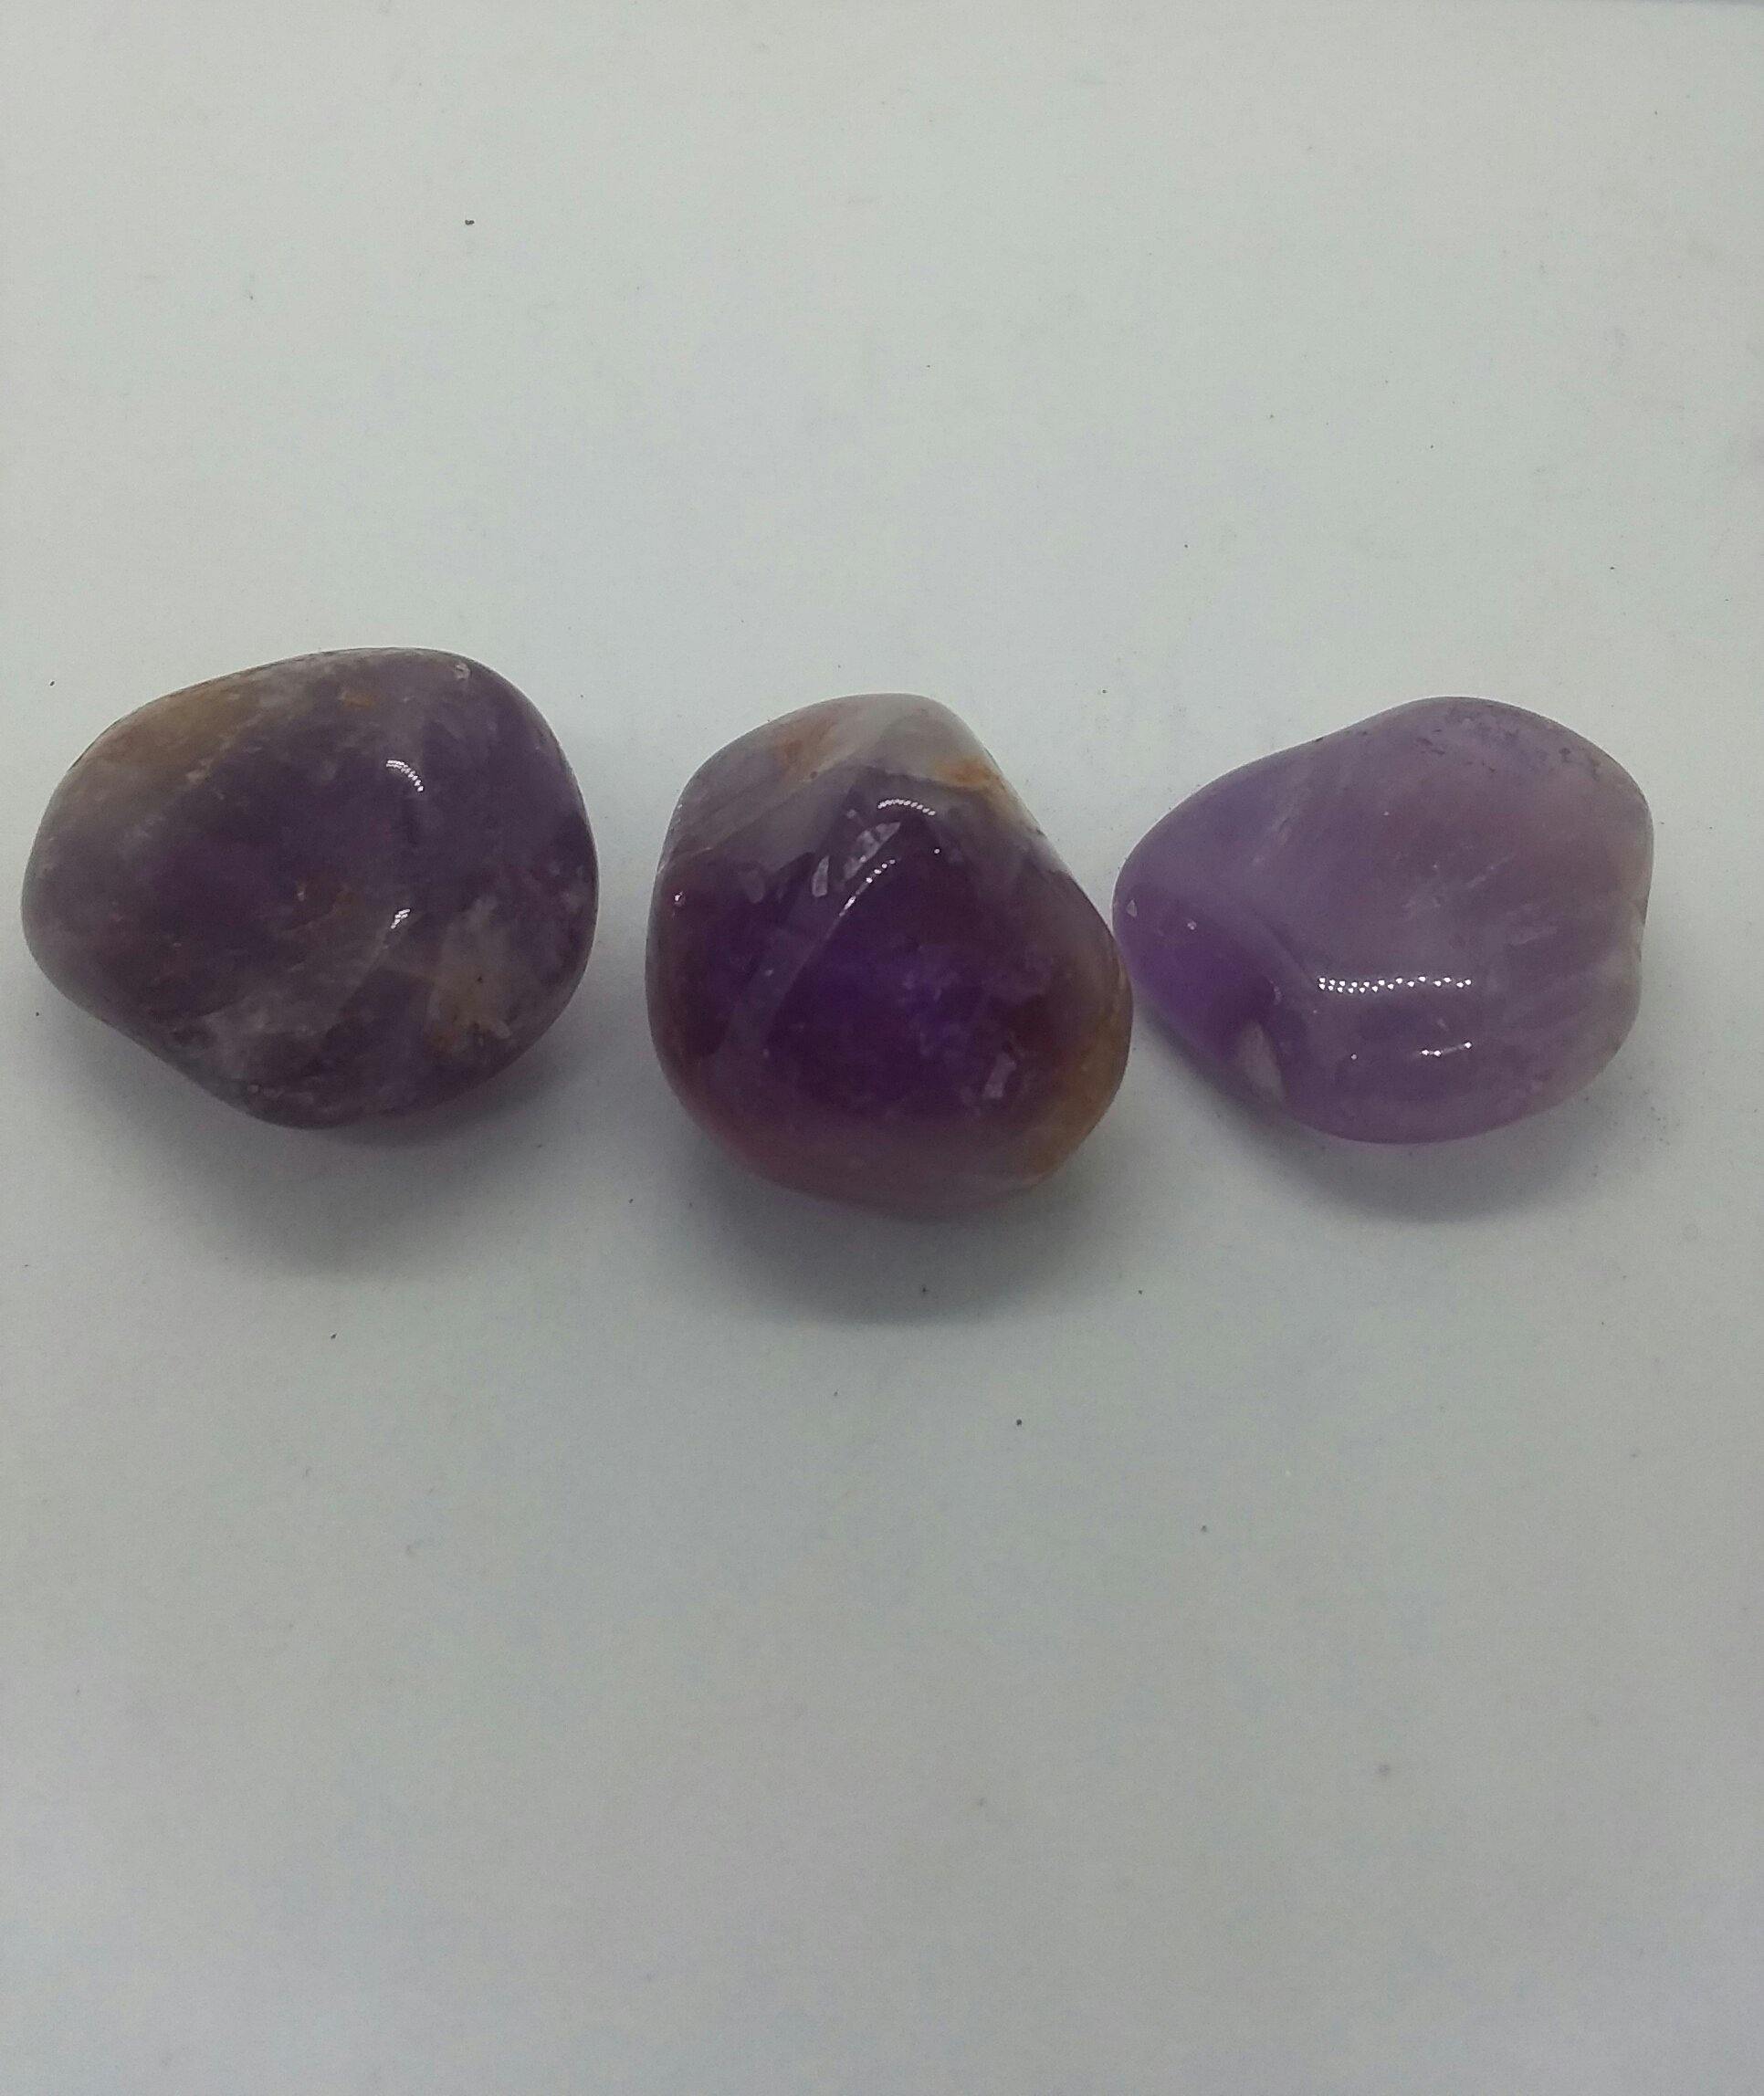  Amethyst Polished Stone - Gemstones available at Amazing Creations Products . Grab yours for $2.00 today!